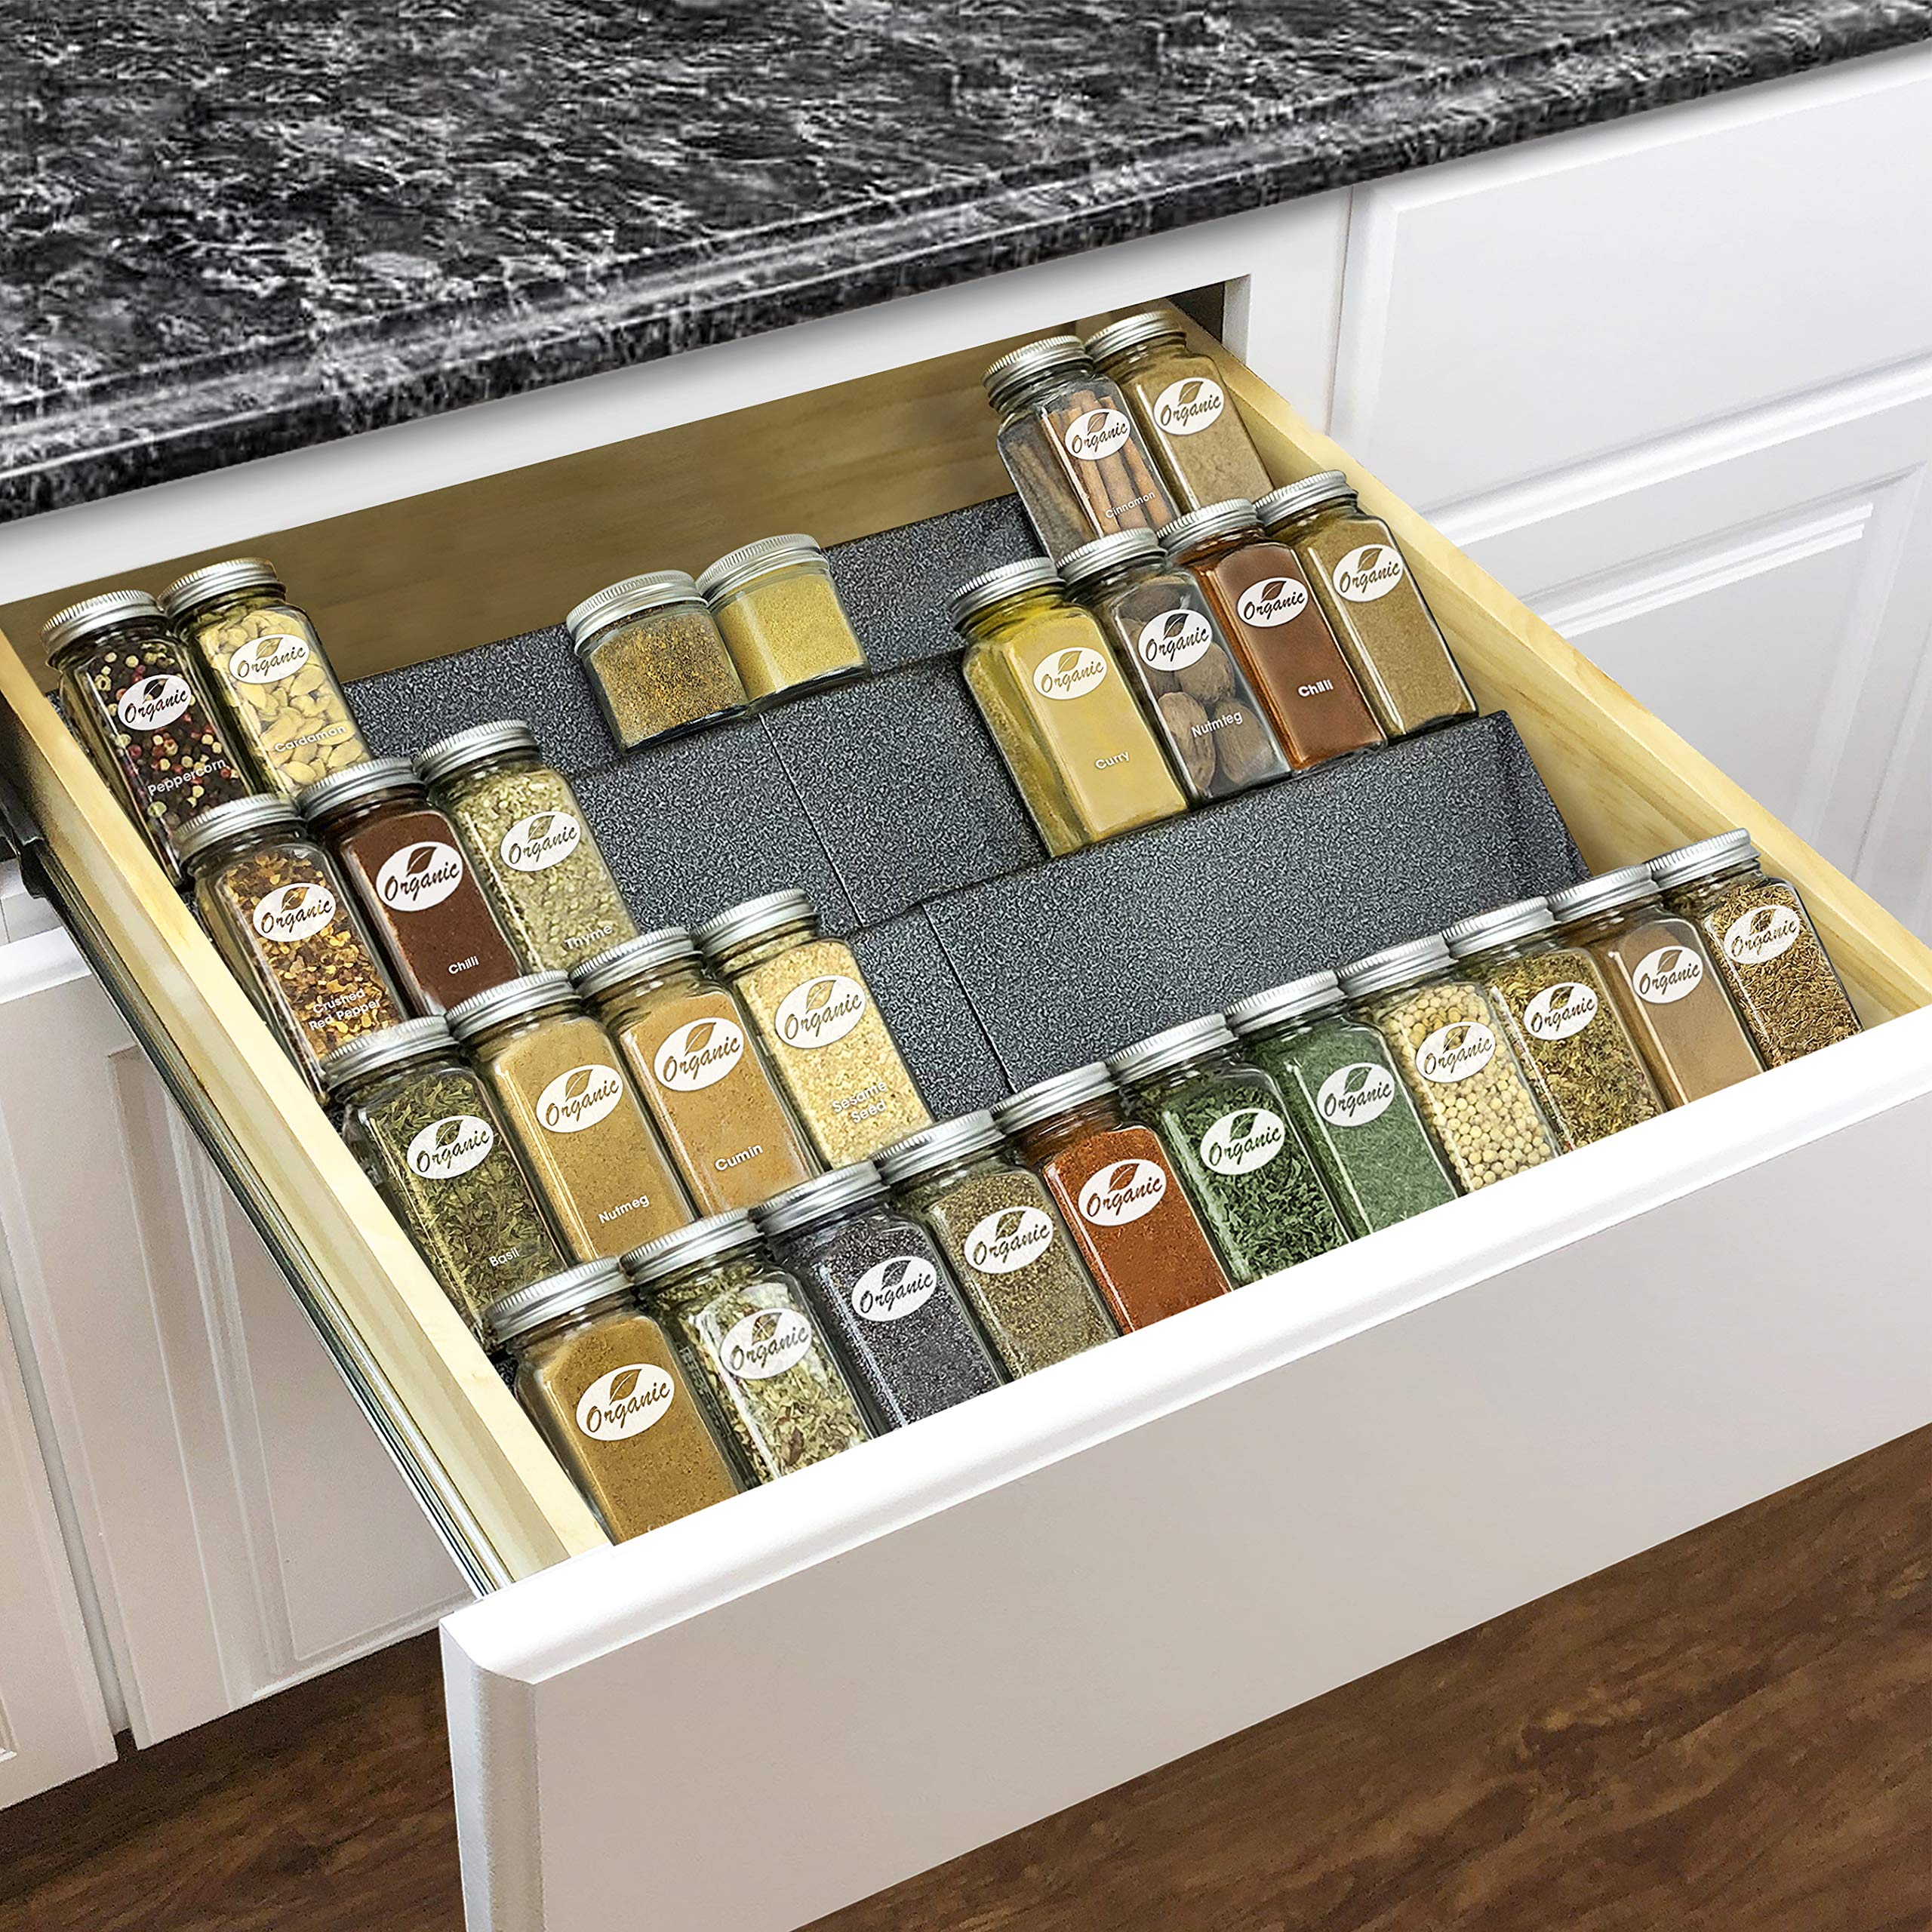 LYNK PROFESSIONAL® Expandable Spice Drawer Organizer - Heavy Gauge Steel 4 Tier Spice Rack - Drawer Insert Tray for Spice Jars, Herbs and Seasoning - Kitchen Cabinet Drawer Storage - Silver Metallic